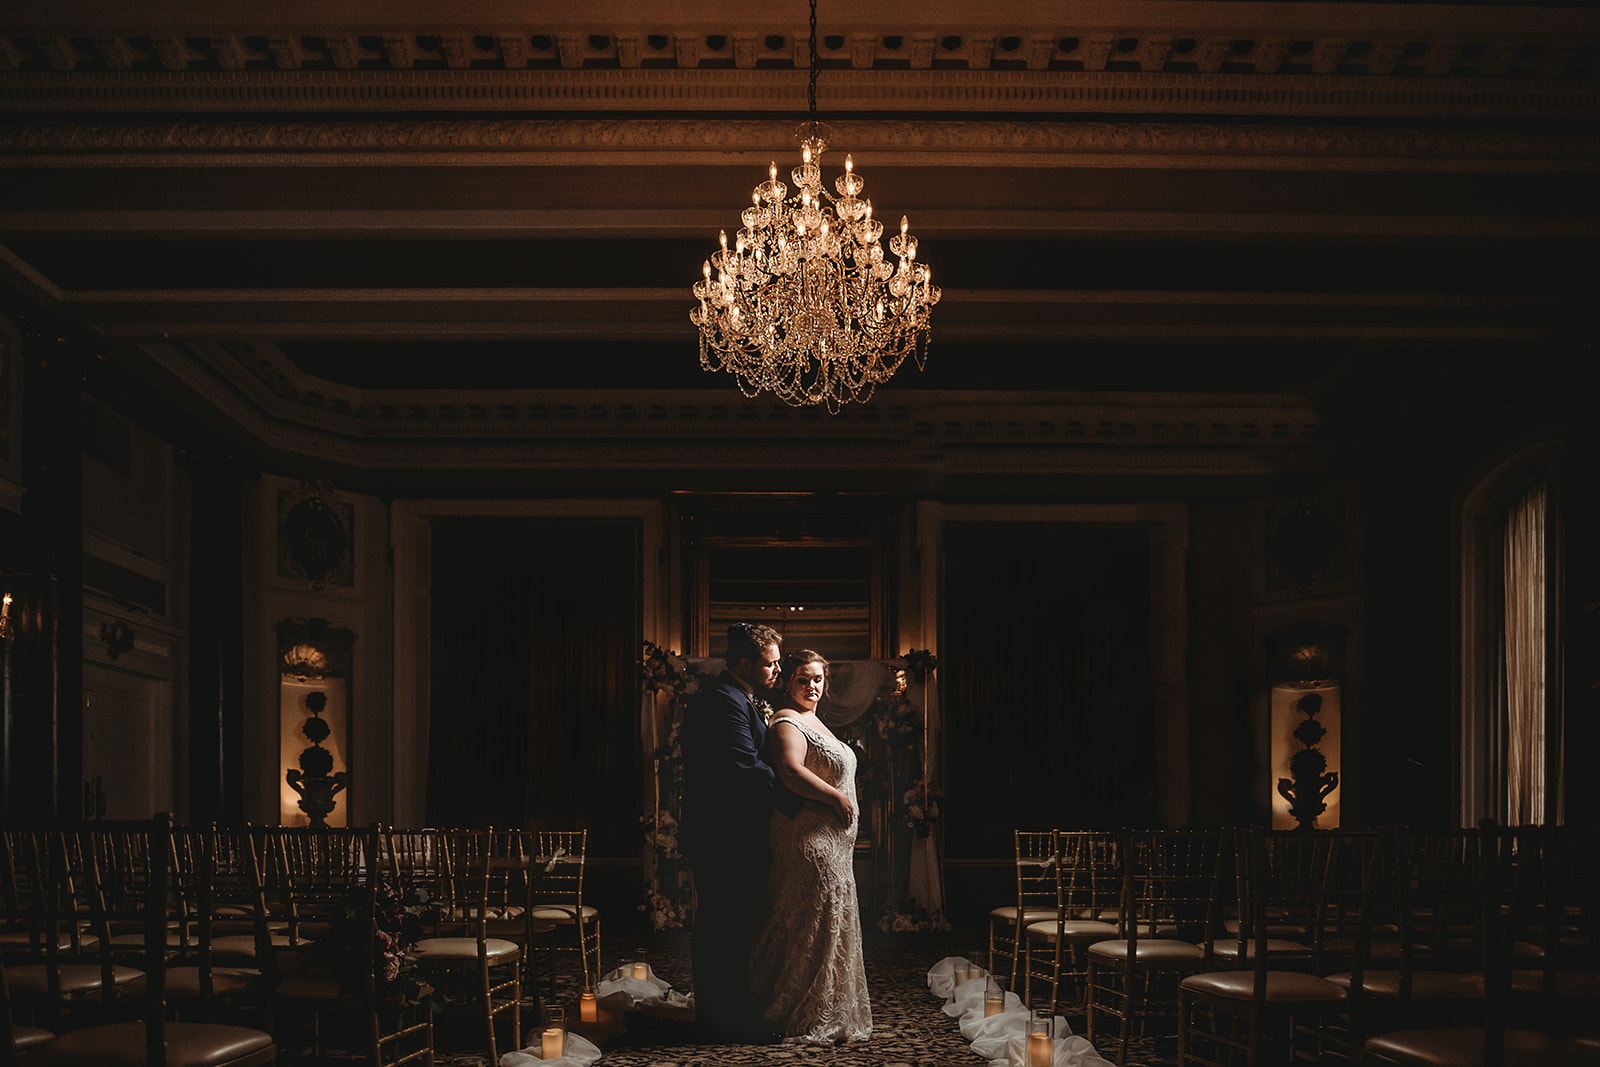 Baltimore photographers photographs bridal portraits at the Belvedere wedding venue with groom embracing bride as he stands behind her in their ceremony hall with a chandelier lit above head